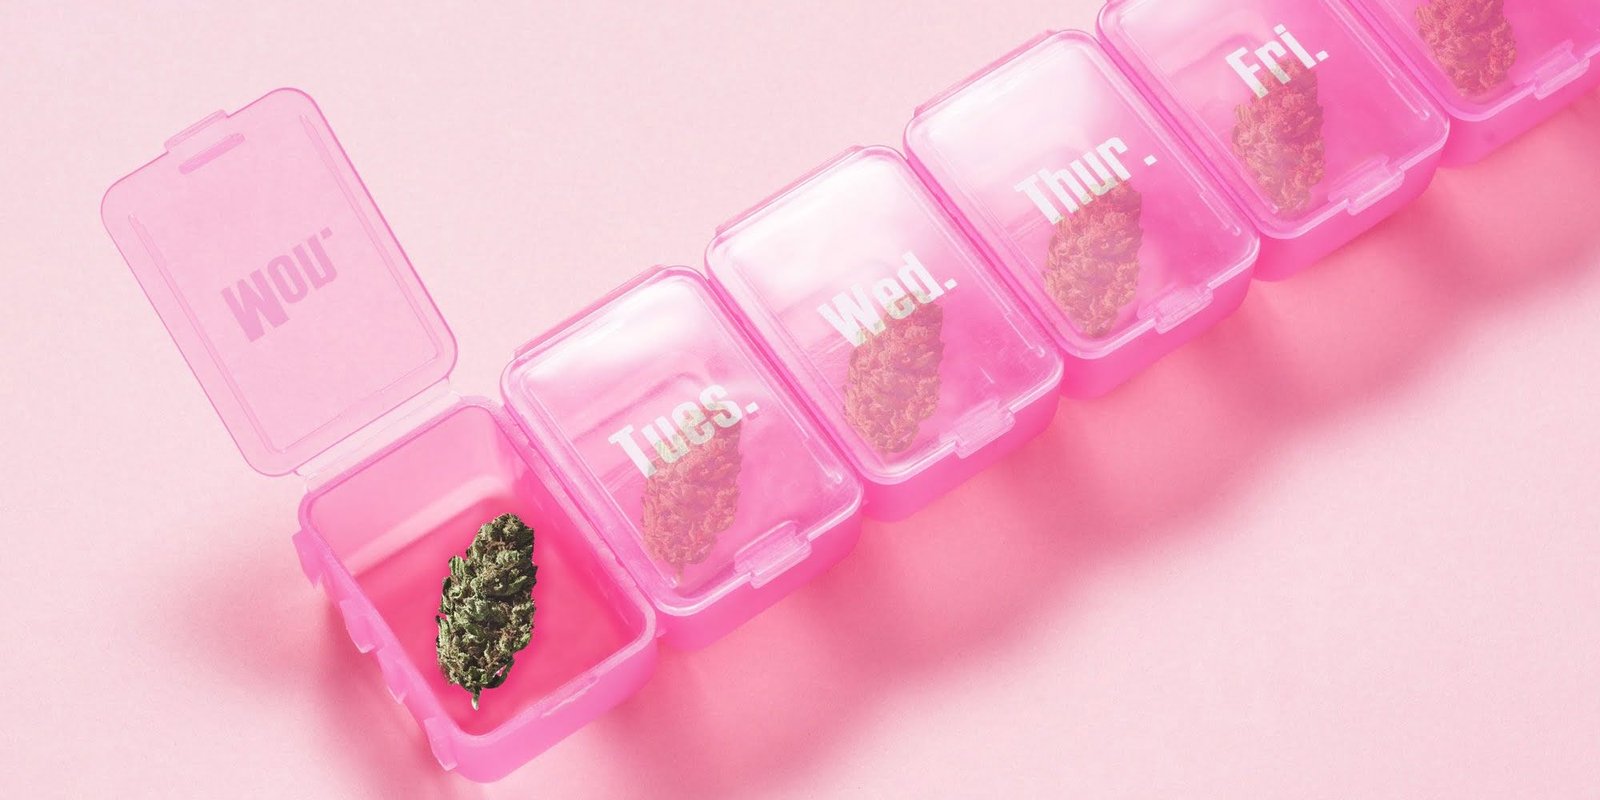 Pill box with cannabis plant inside